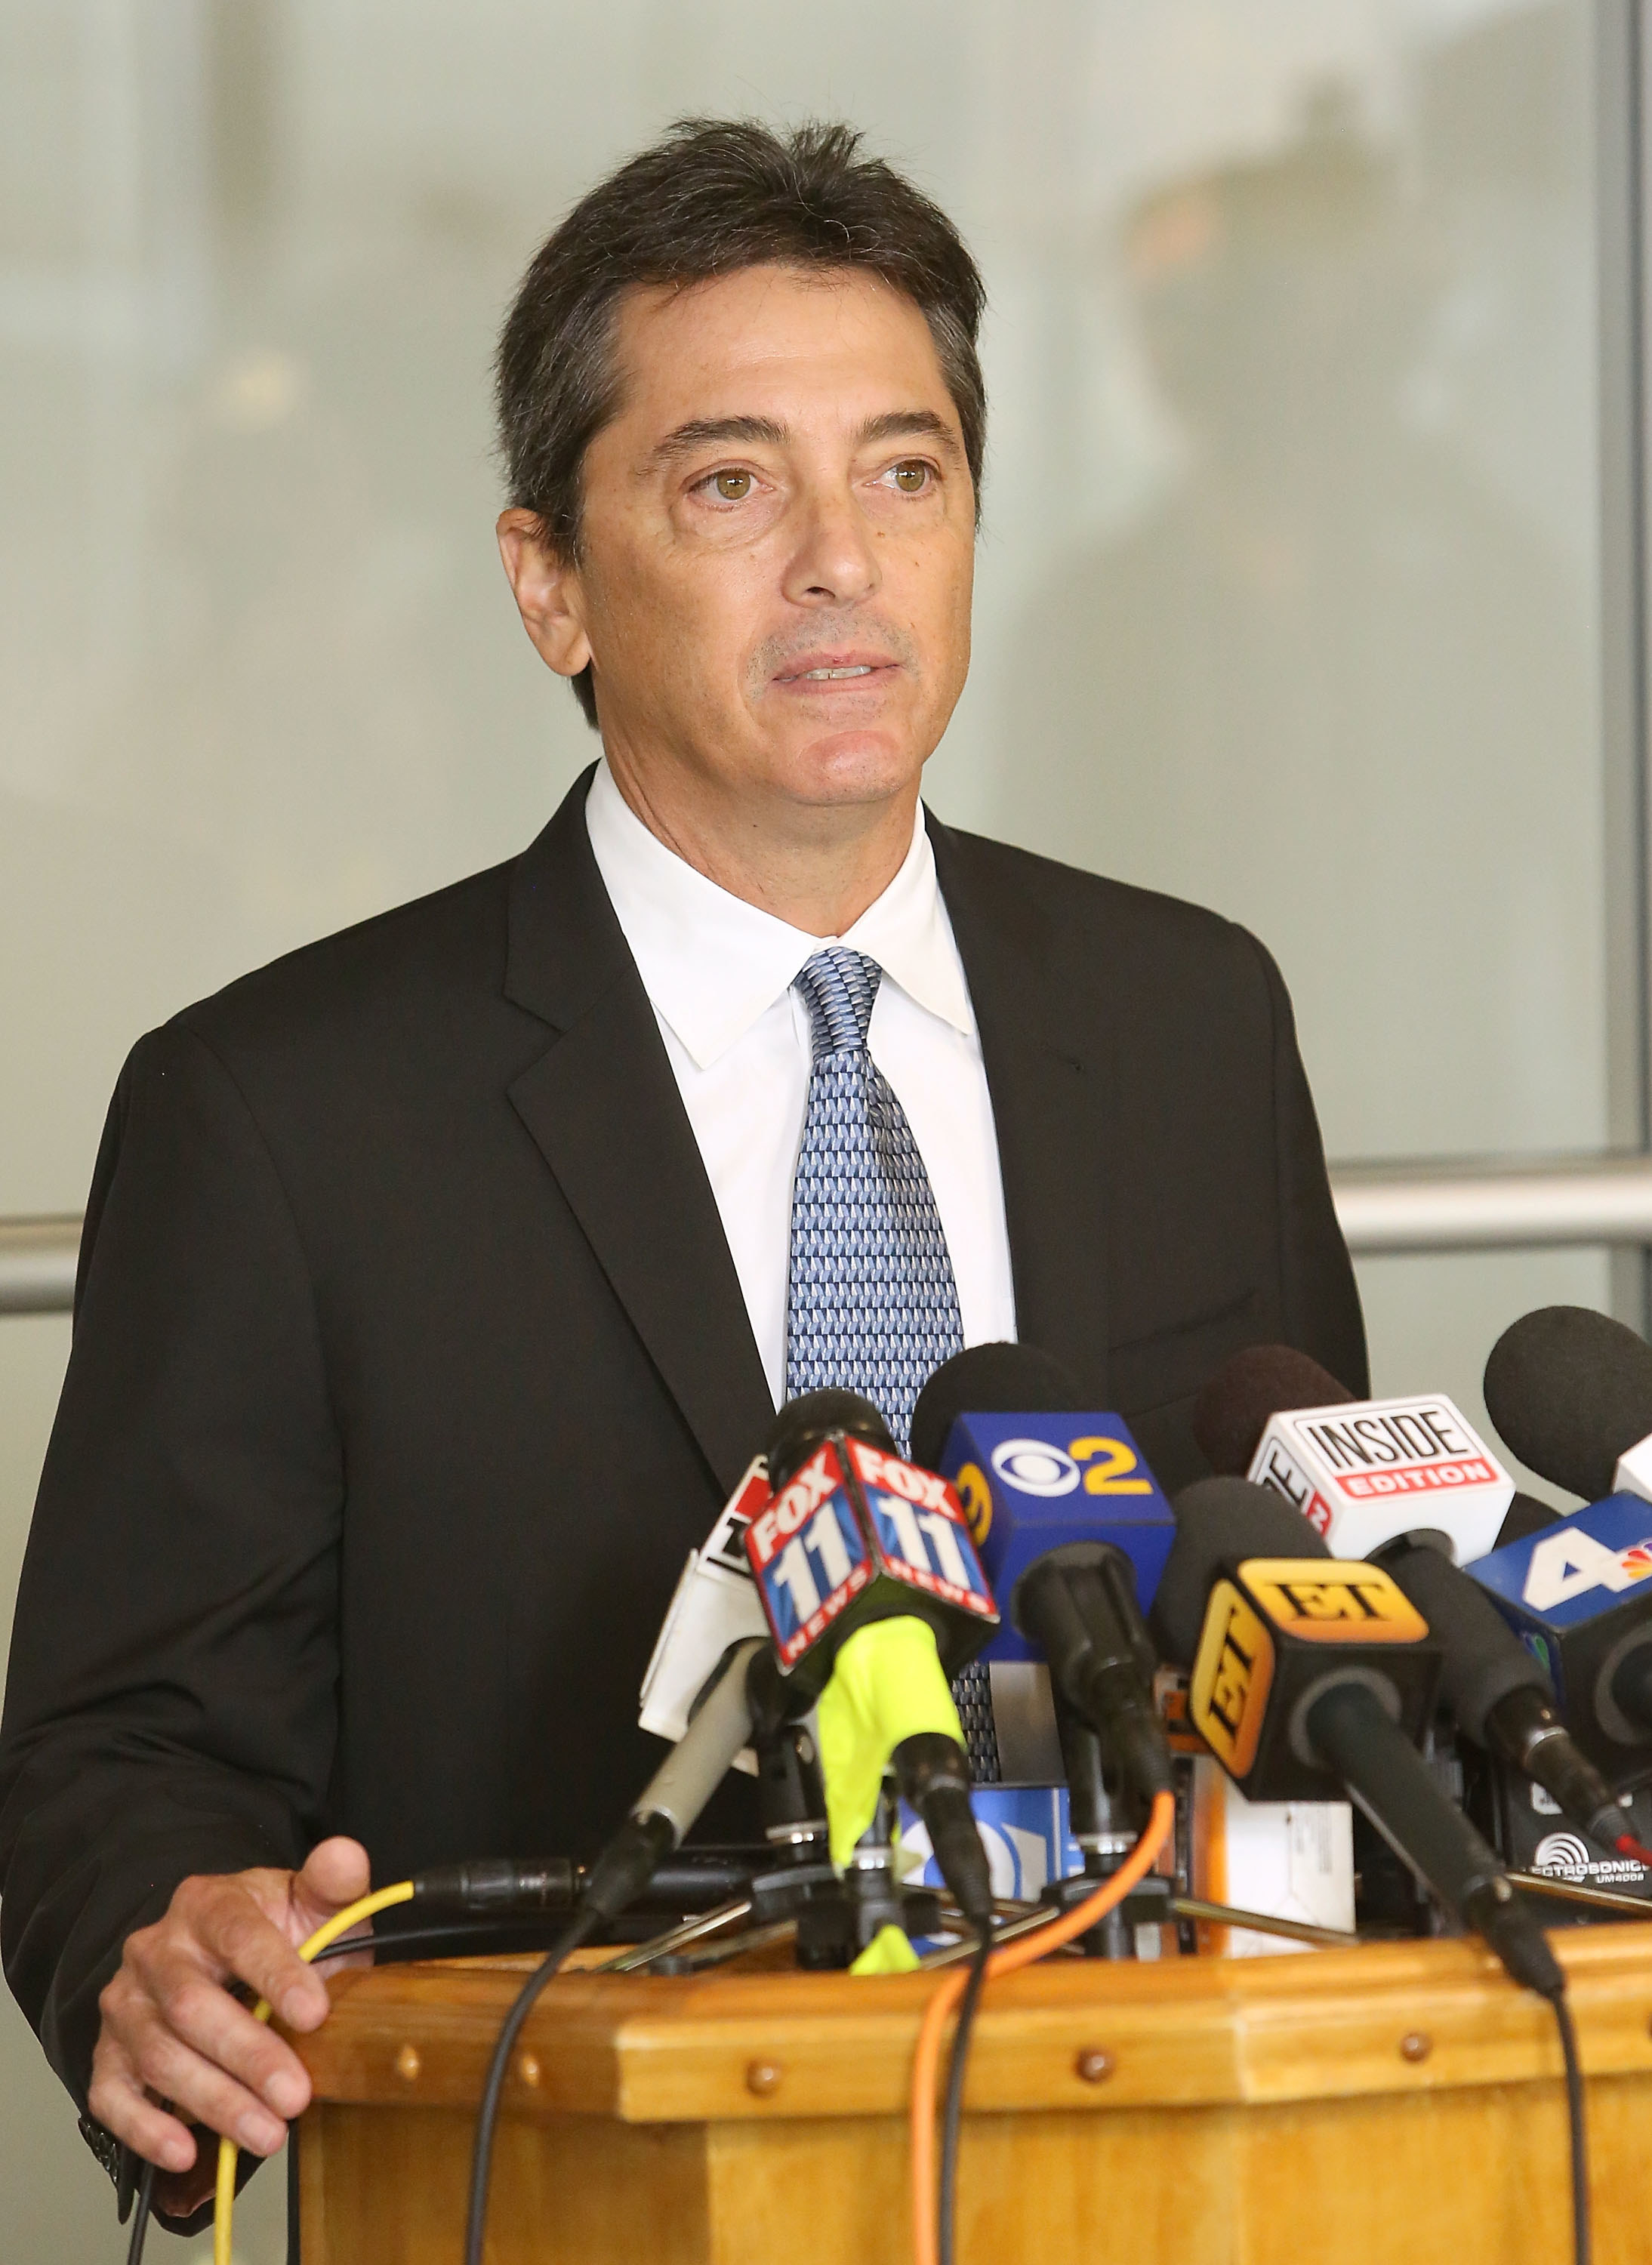 Scott speaking at a press conference